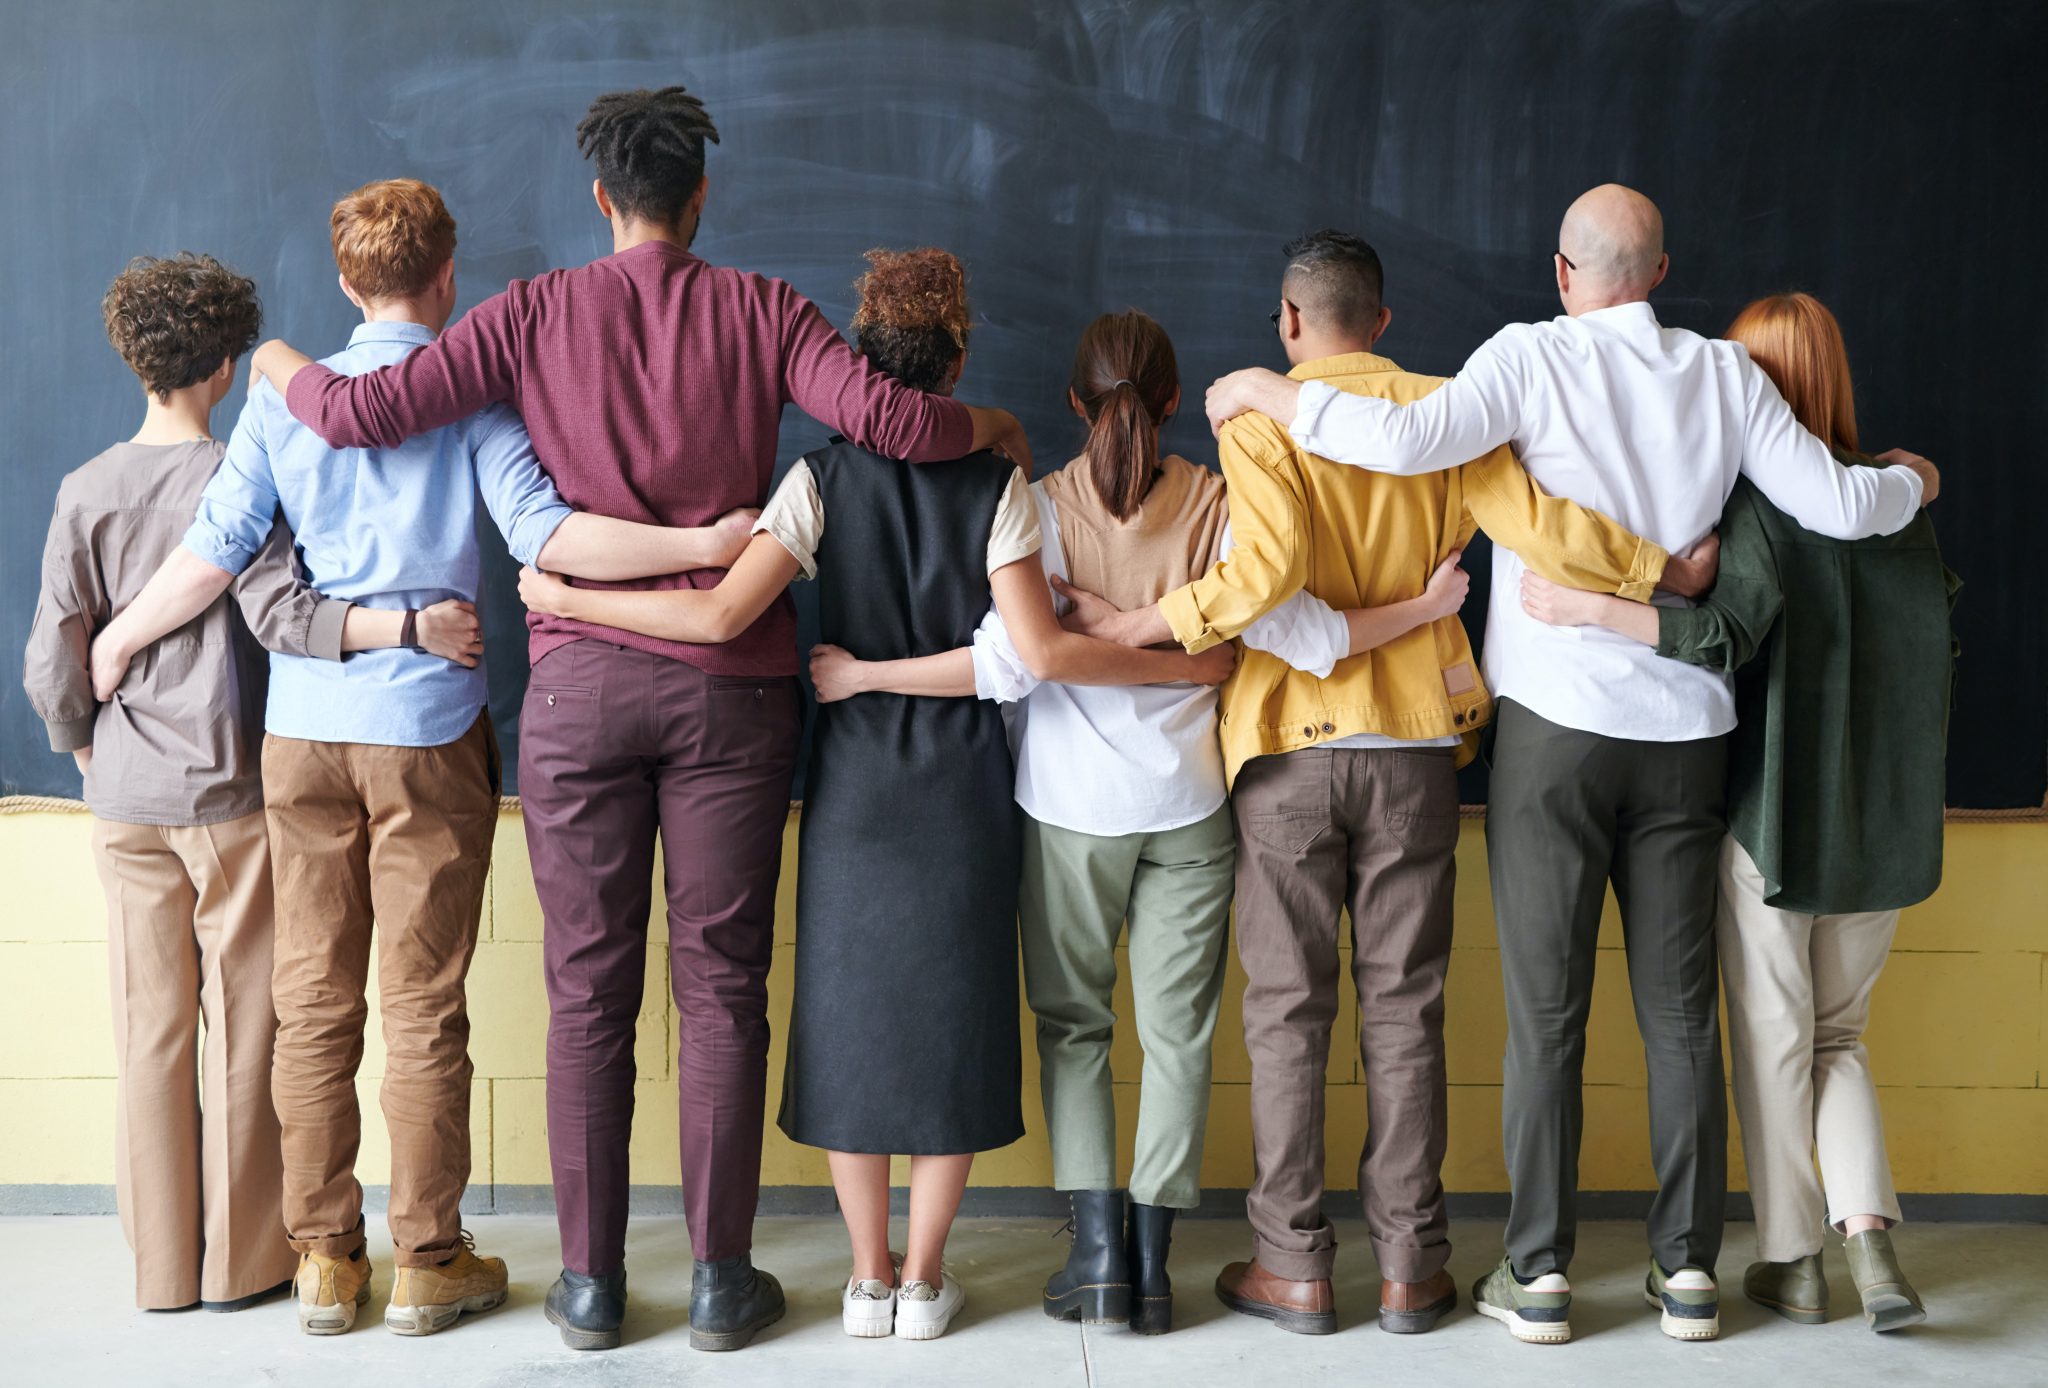 Multicultural group of people facing a chalkboard with arms interlocked.